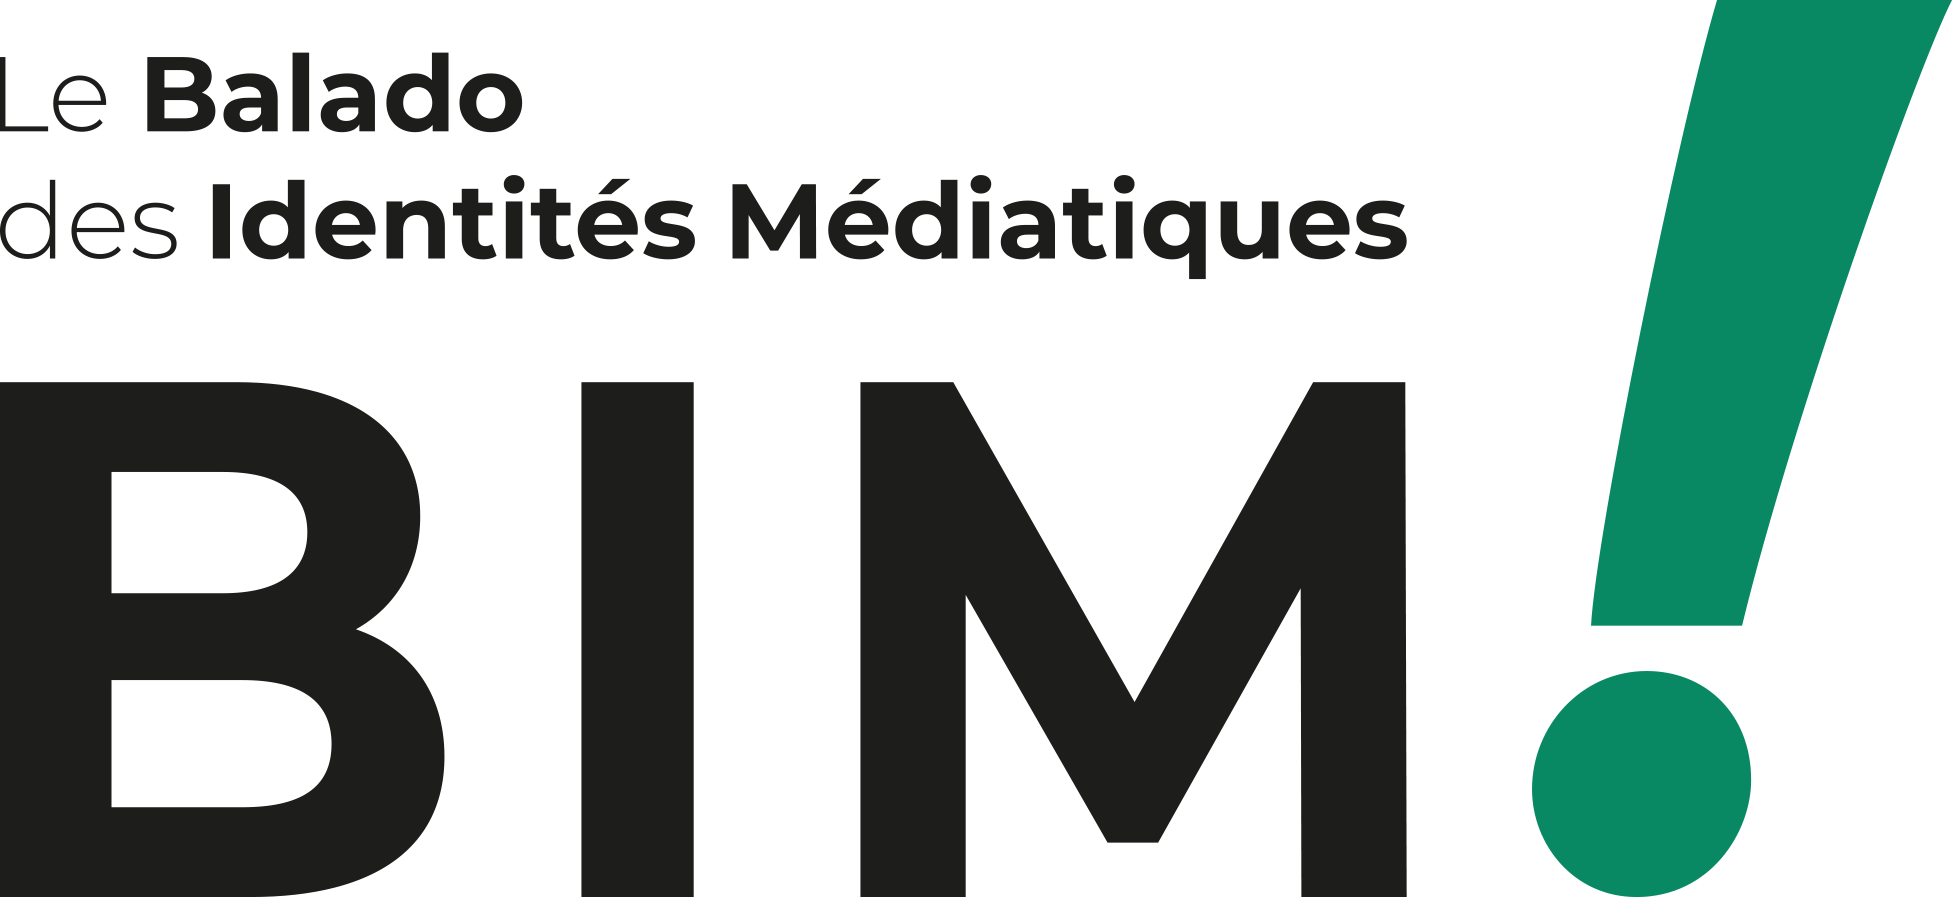 You are currently viewing BIM ! Le balado des identités médiatiques (french only)